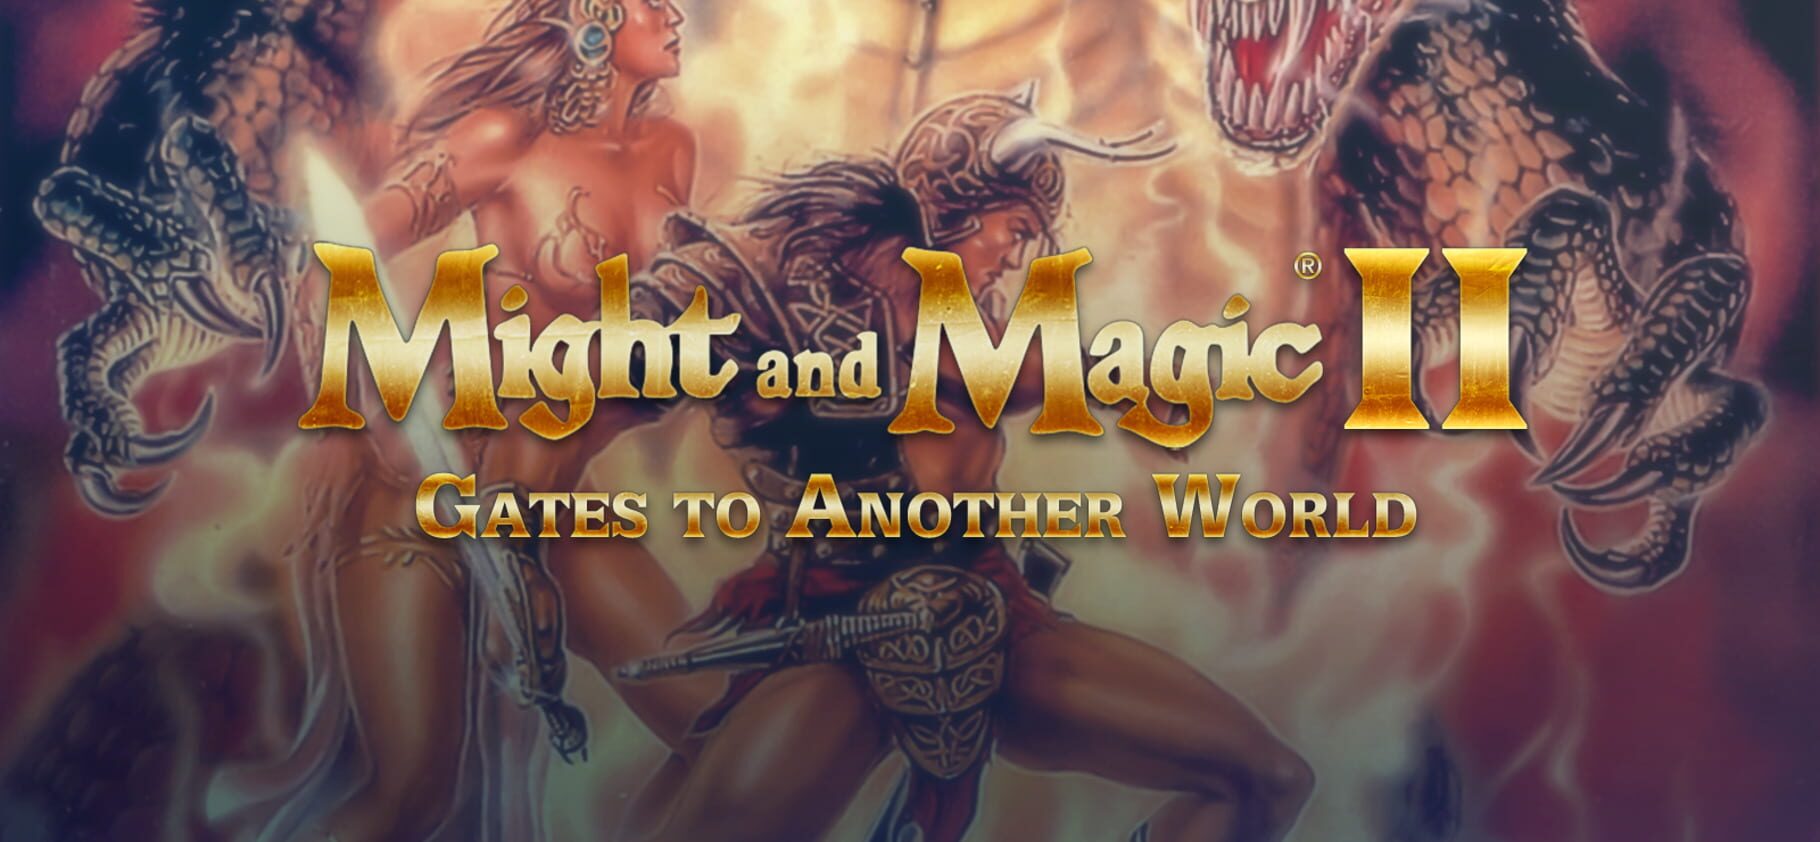 Arte - Might and Magic II: Gates to Another World